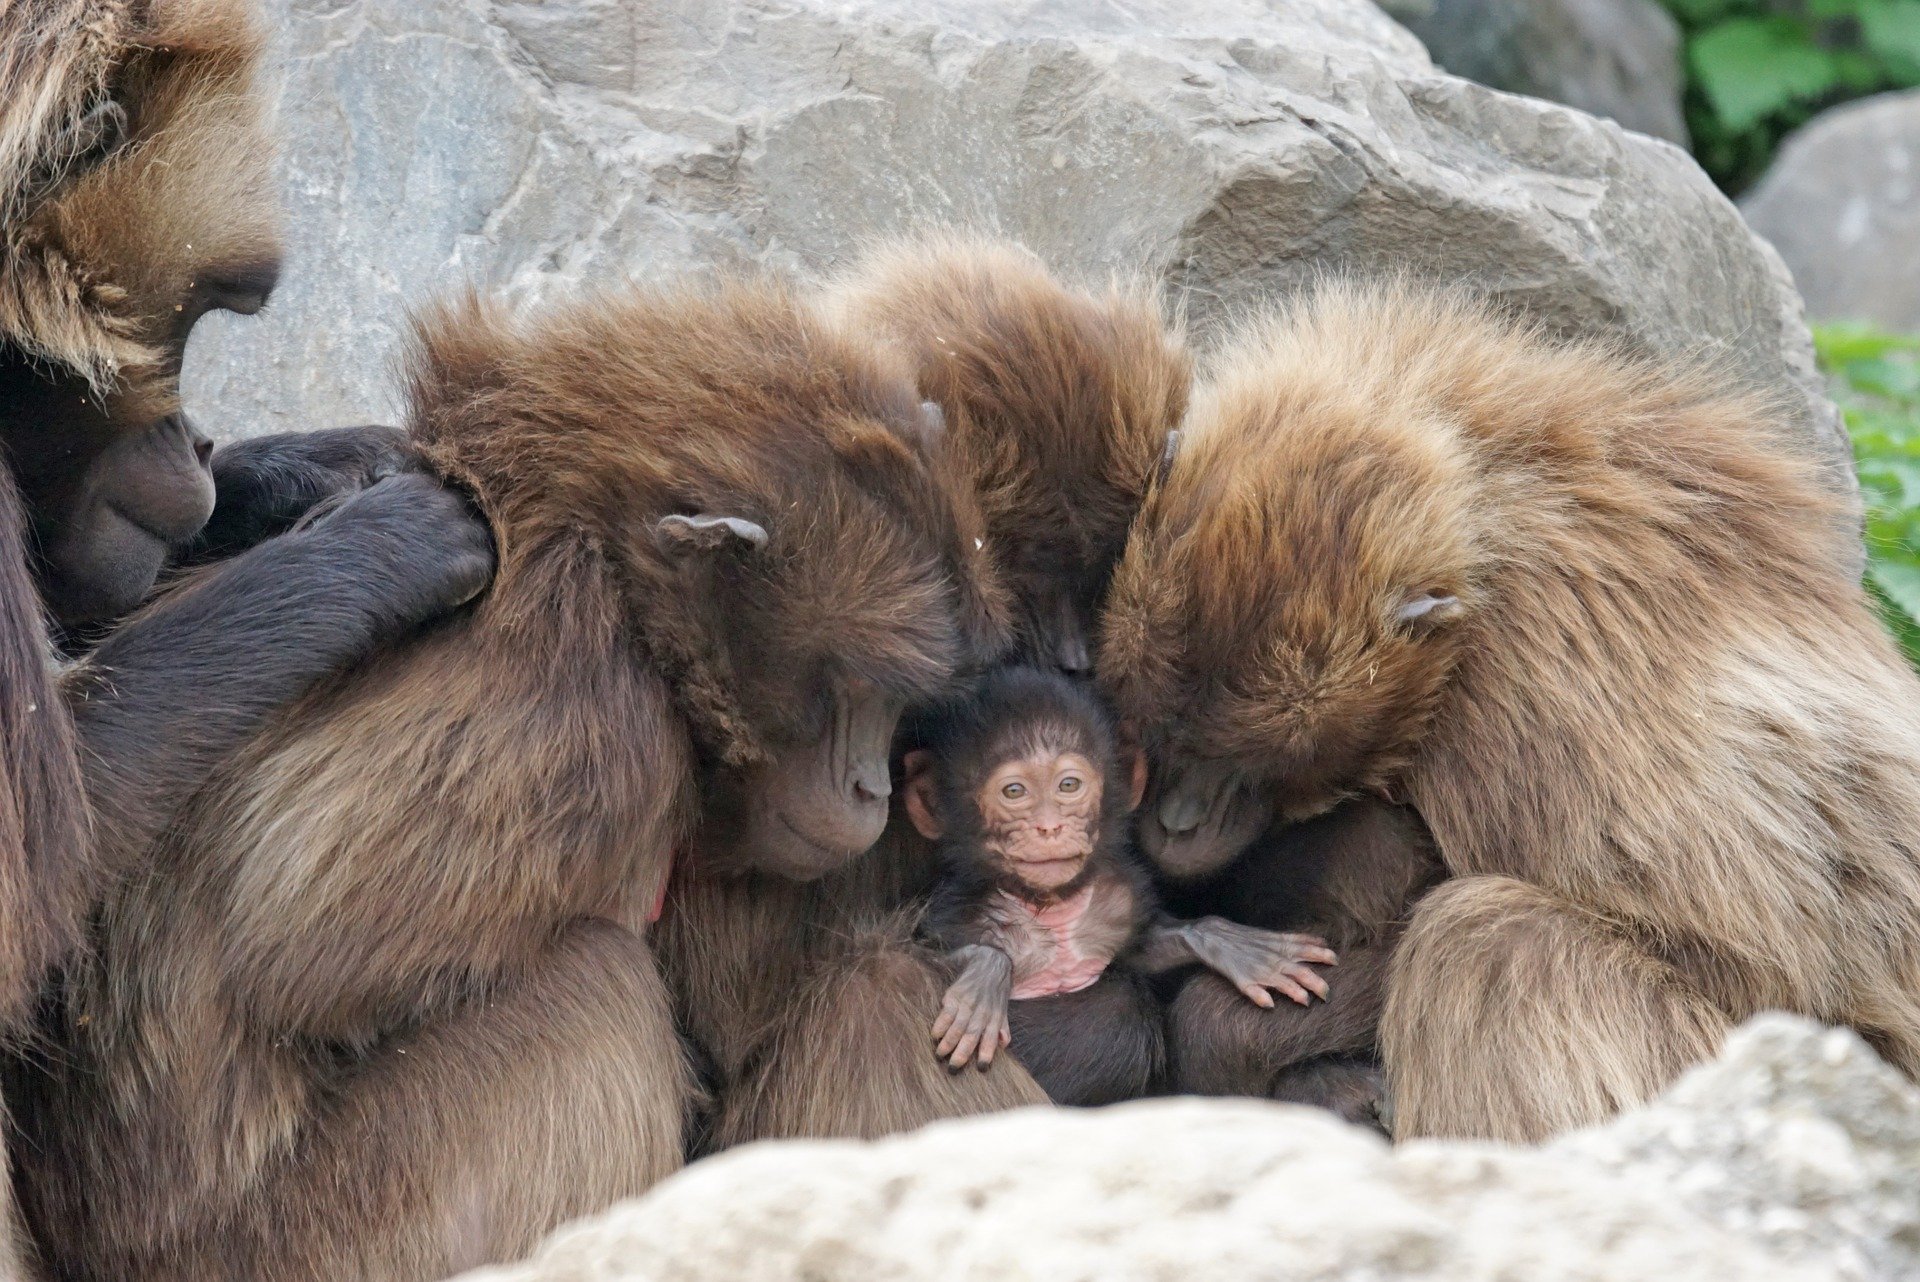 A gelada "baboon" family, a species of Old World monkey found only in the Ethiopian Highlands.